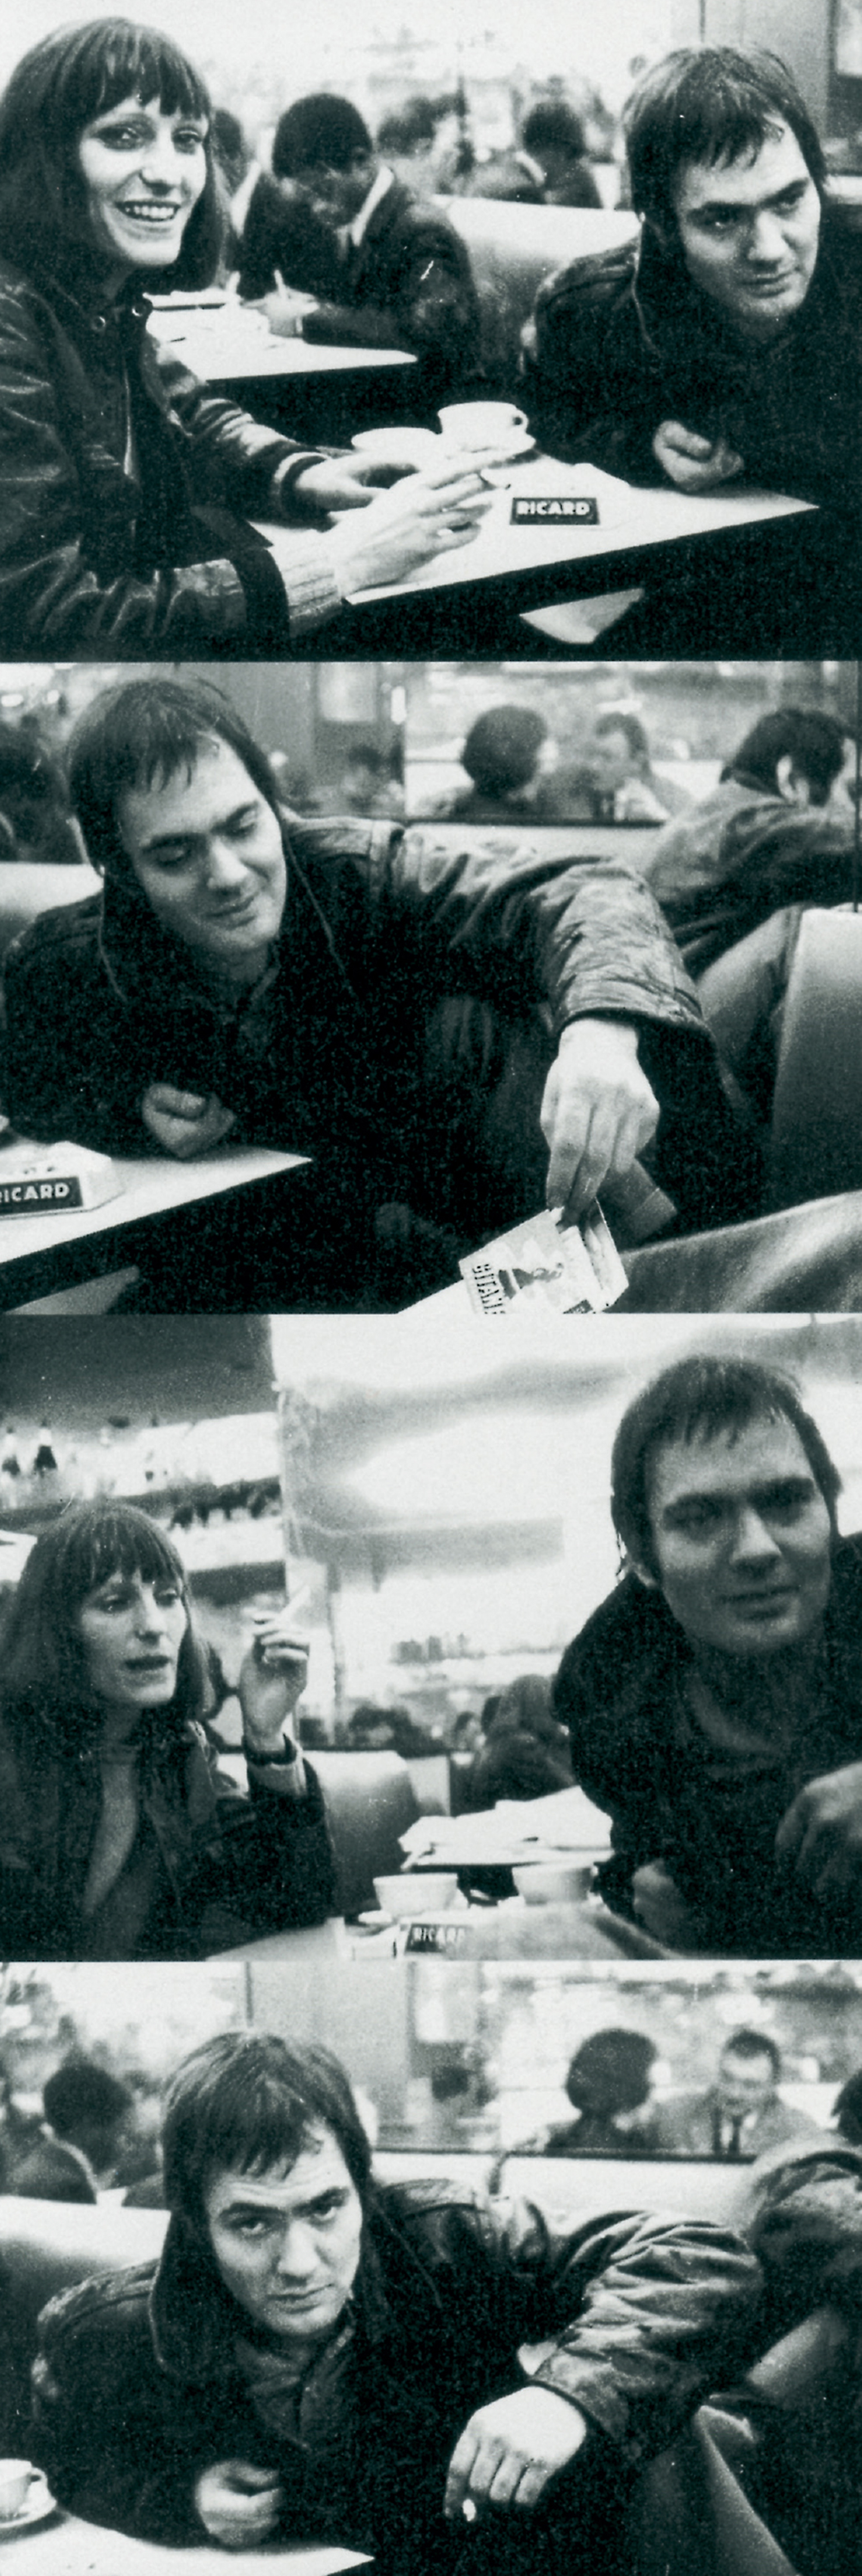 Four photographs by Astrid Proll of Gudrun Ensslin and Andreas Baader in a Paris cafe, November 1969.